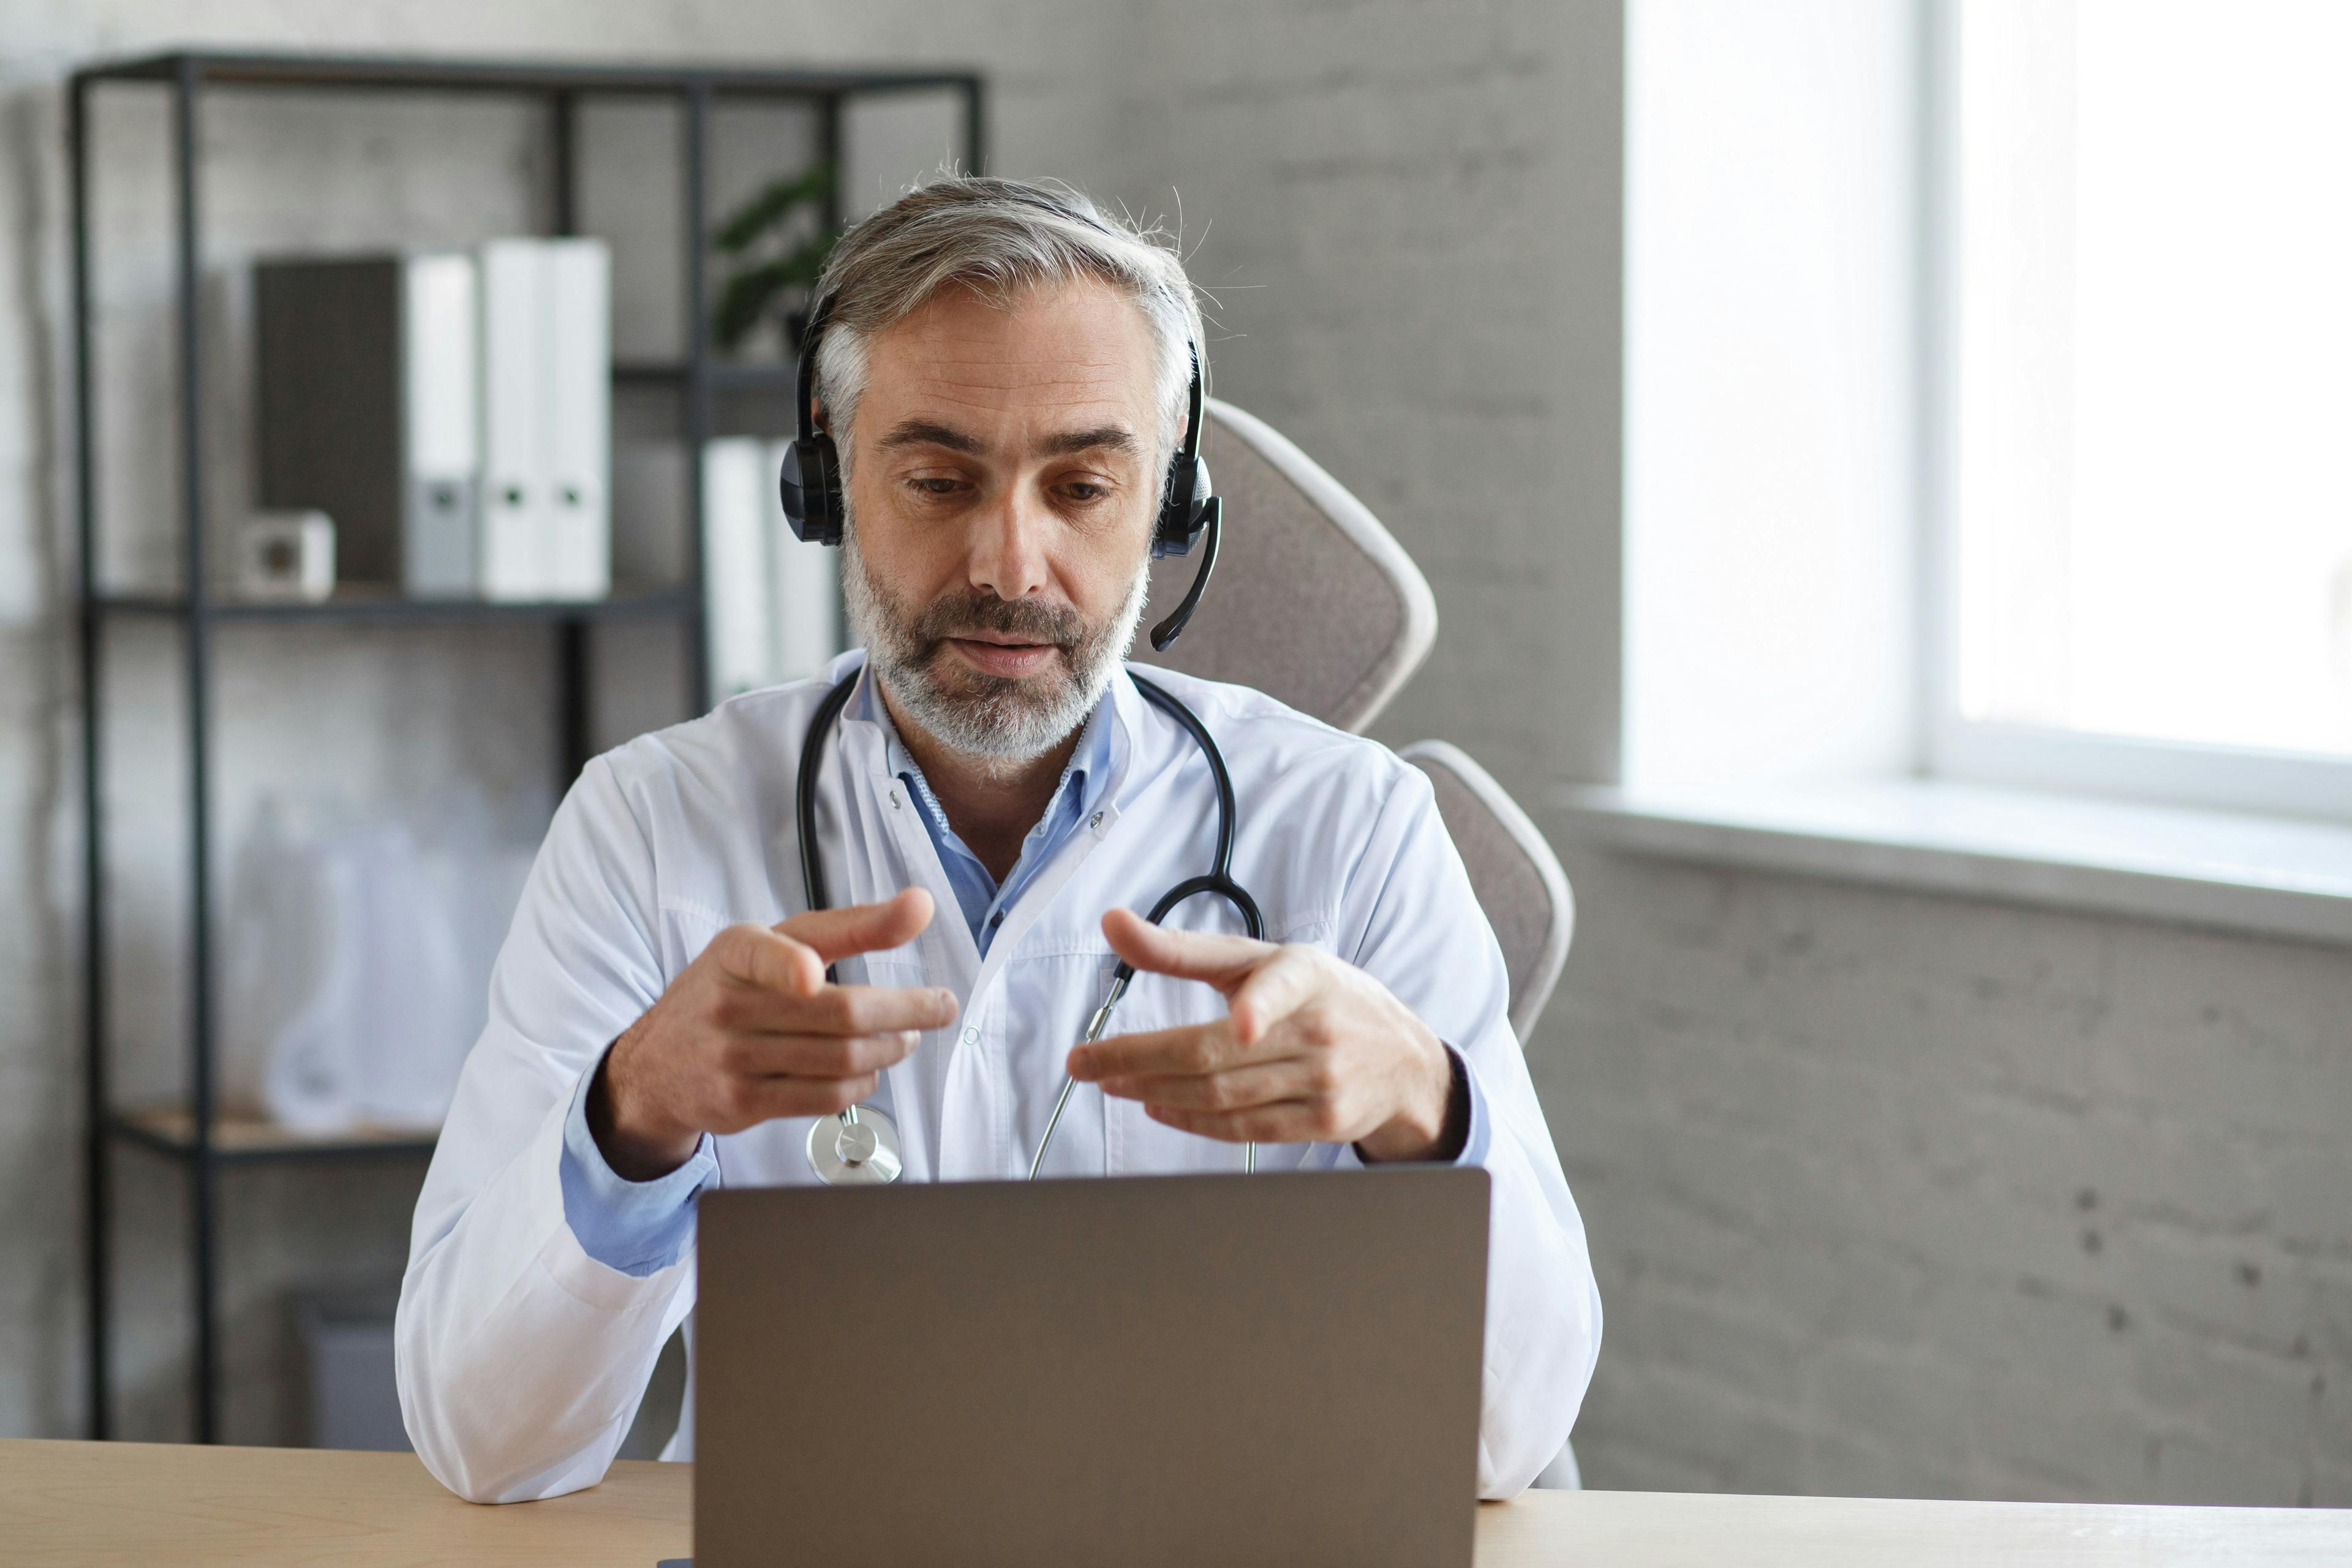 Primary care telehealth visits coded lower than in-office visits: ©Yurii Maslak - stock.adobe.com